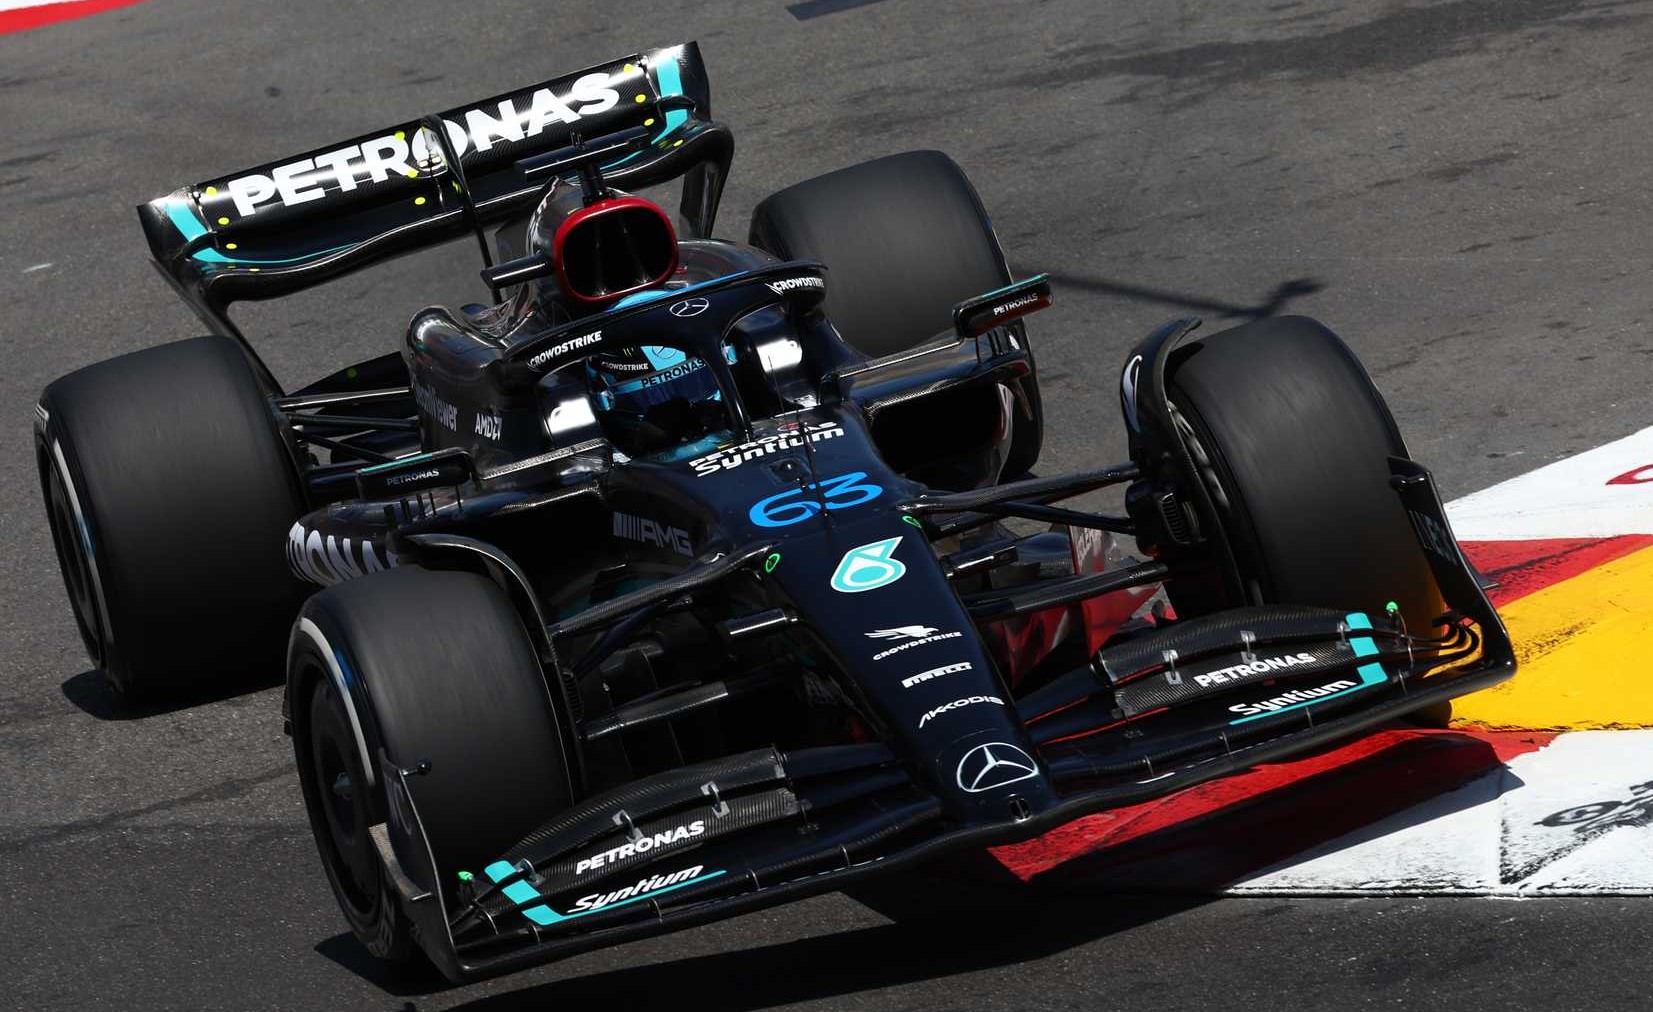 Russell forgetting Mercedes upgrades after facing Monaco challenges